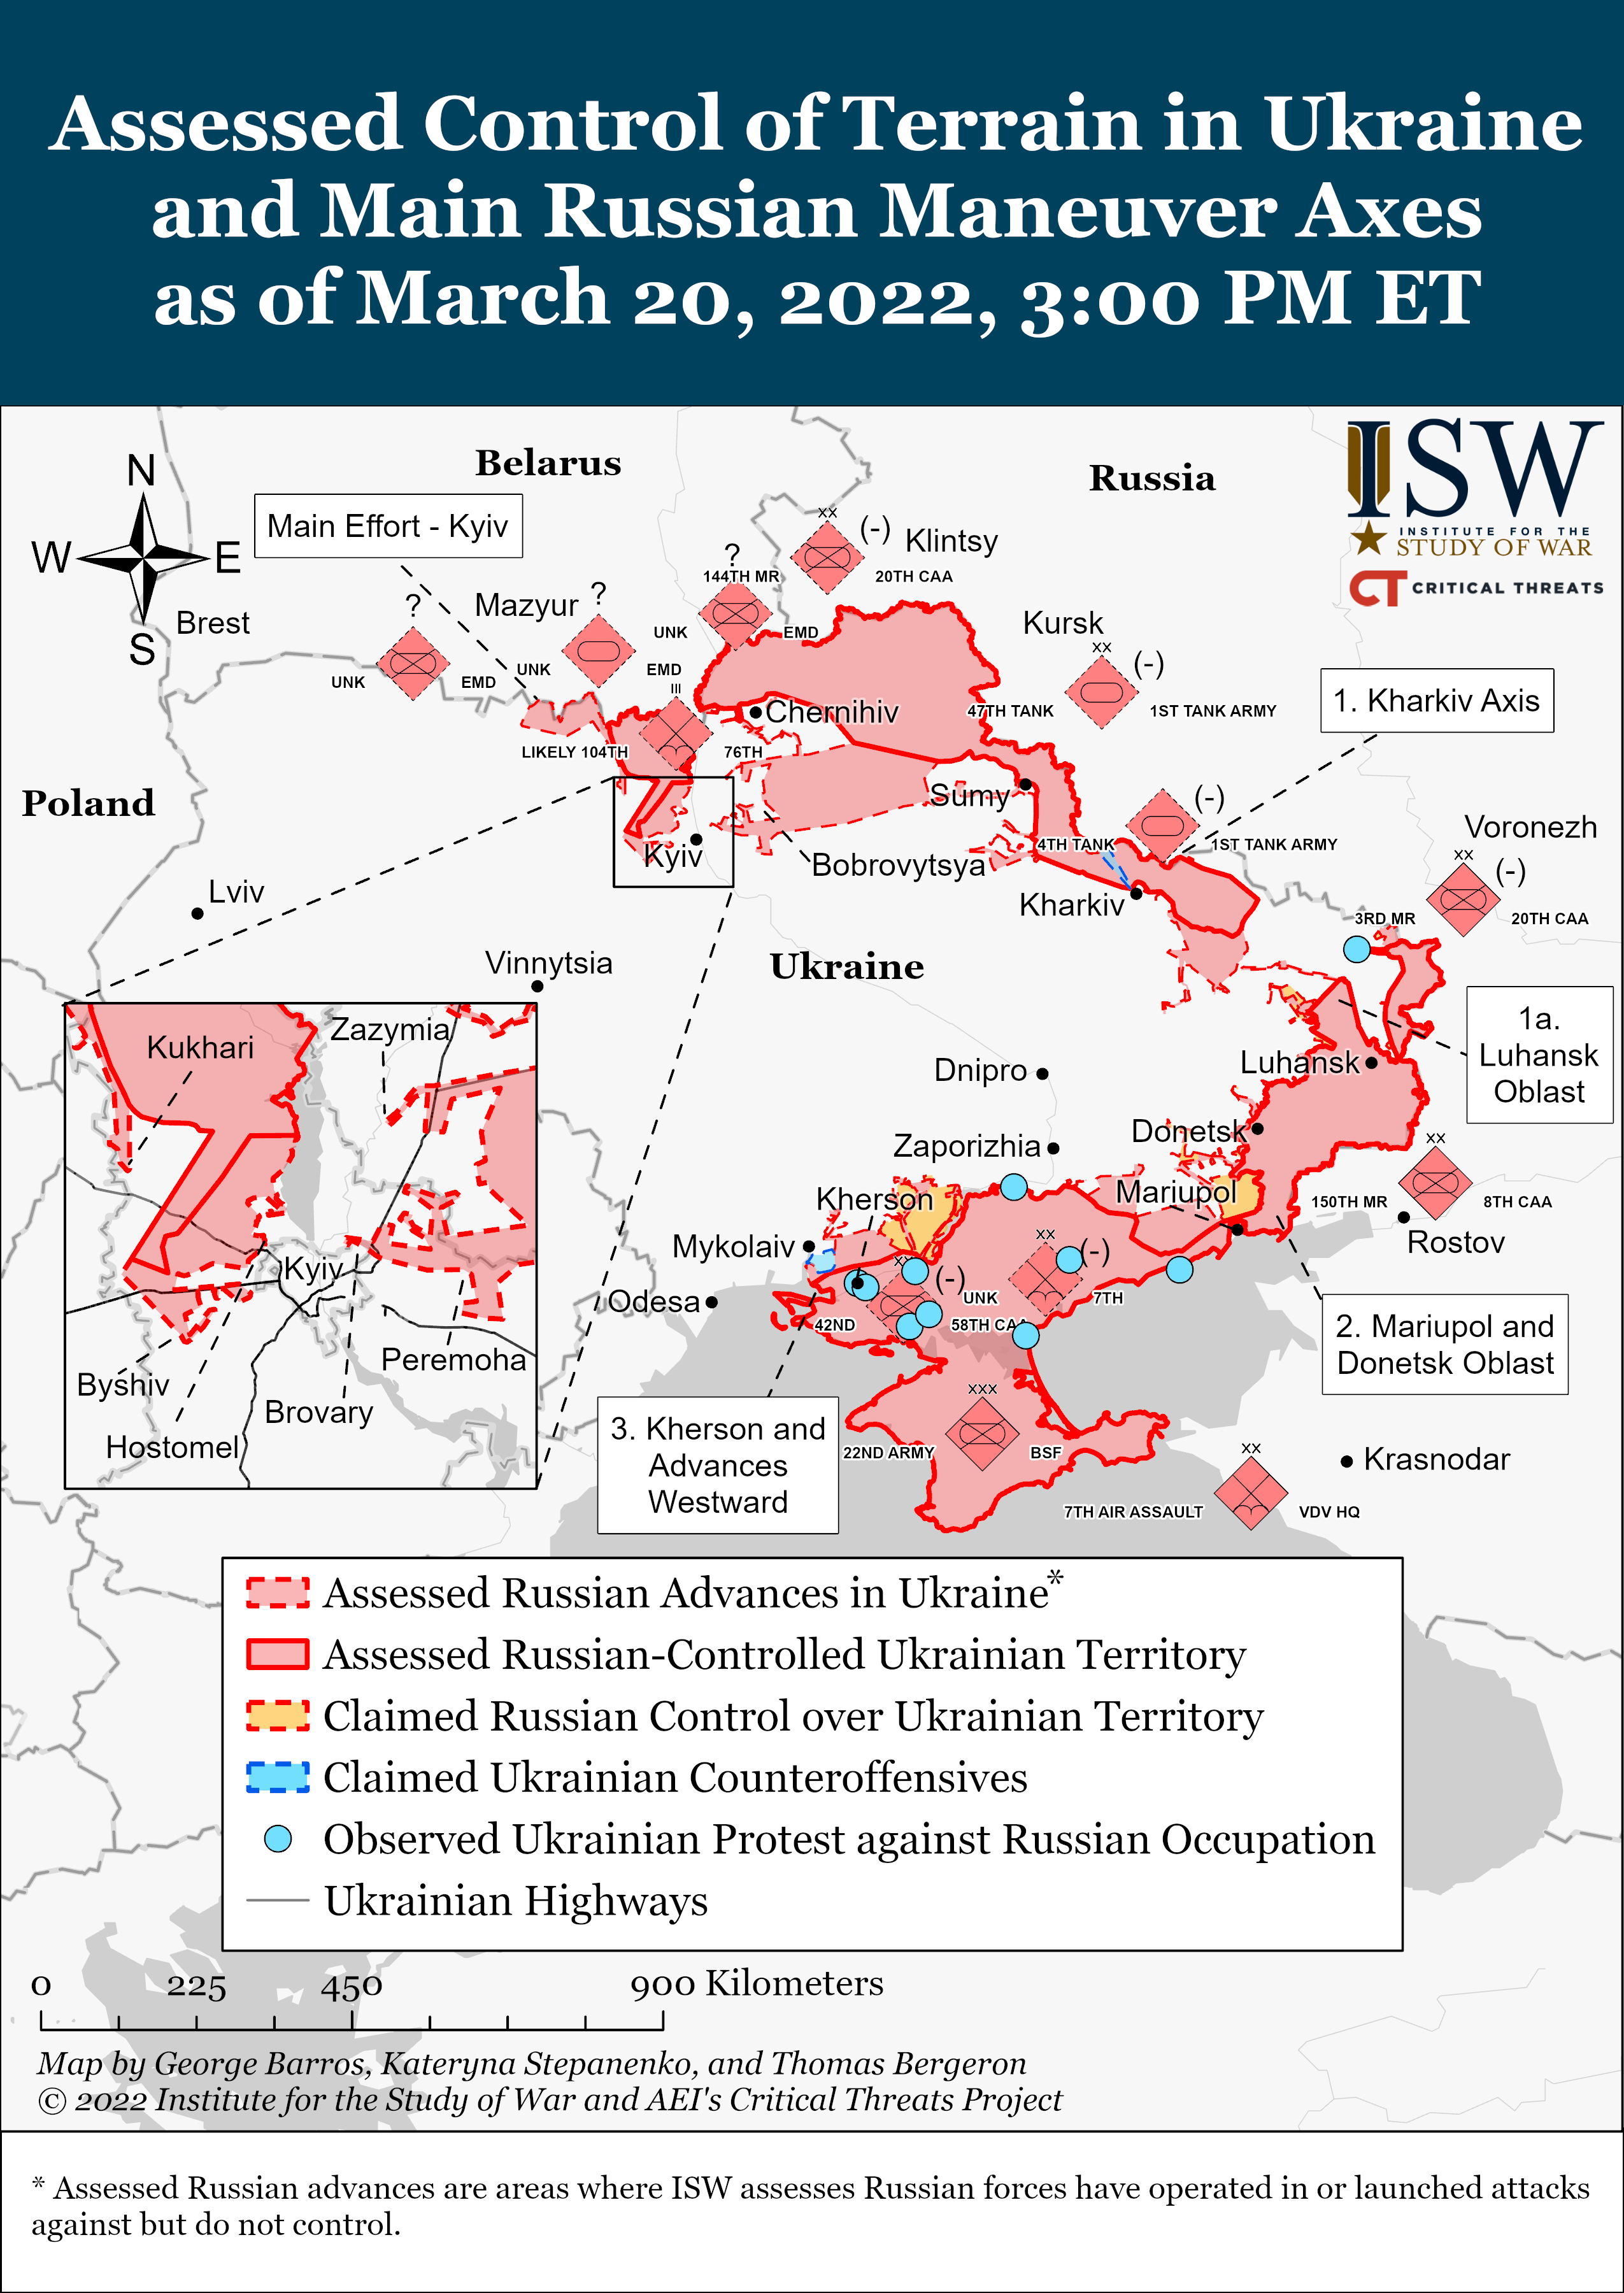 Control of Terrain Map for Ukraine, March 20, 2022